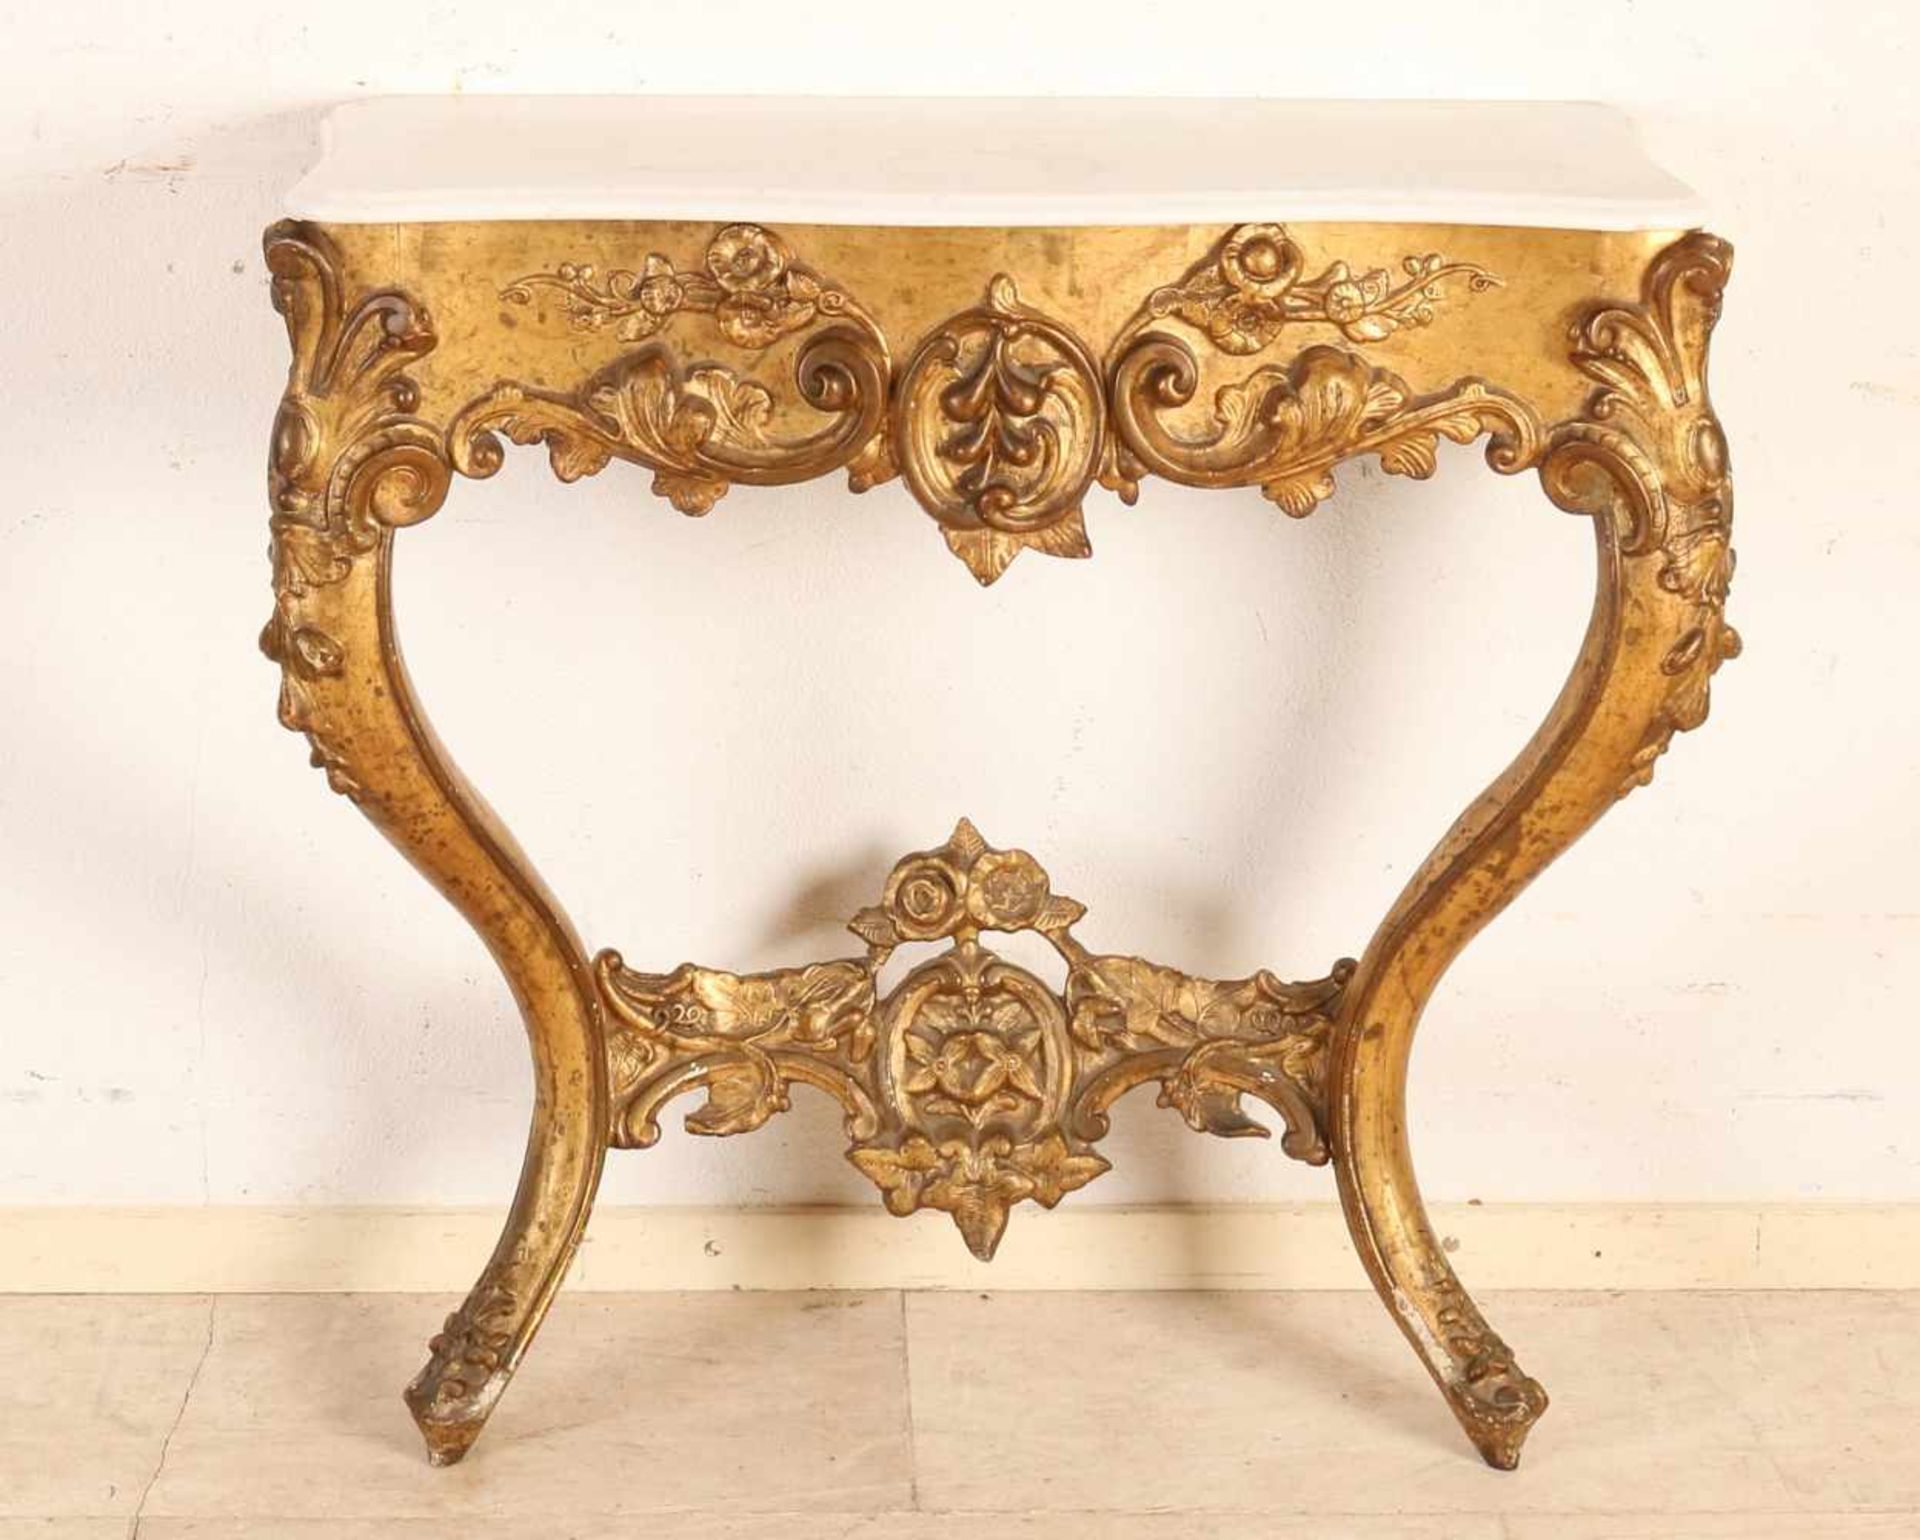 18th - 19th Century gilt console table with marble top. Some damage. Size: 80 x 40 x 27 cm. In